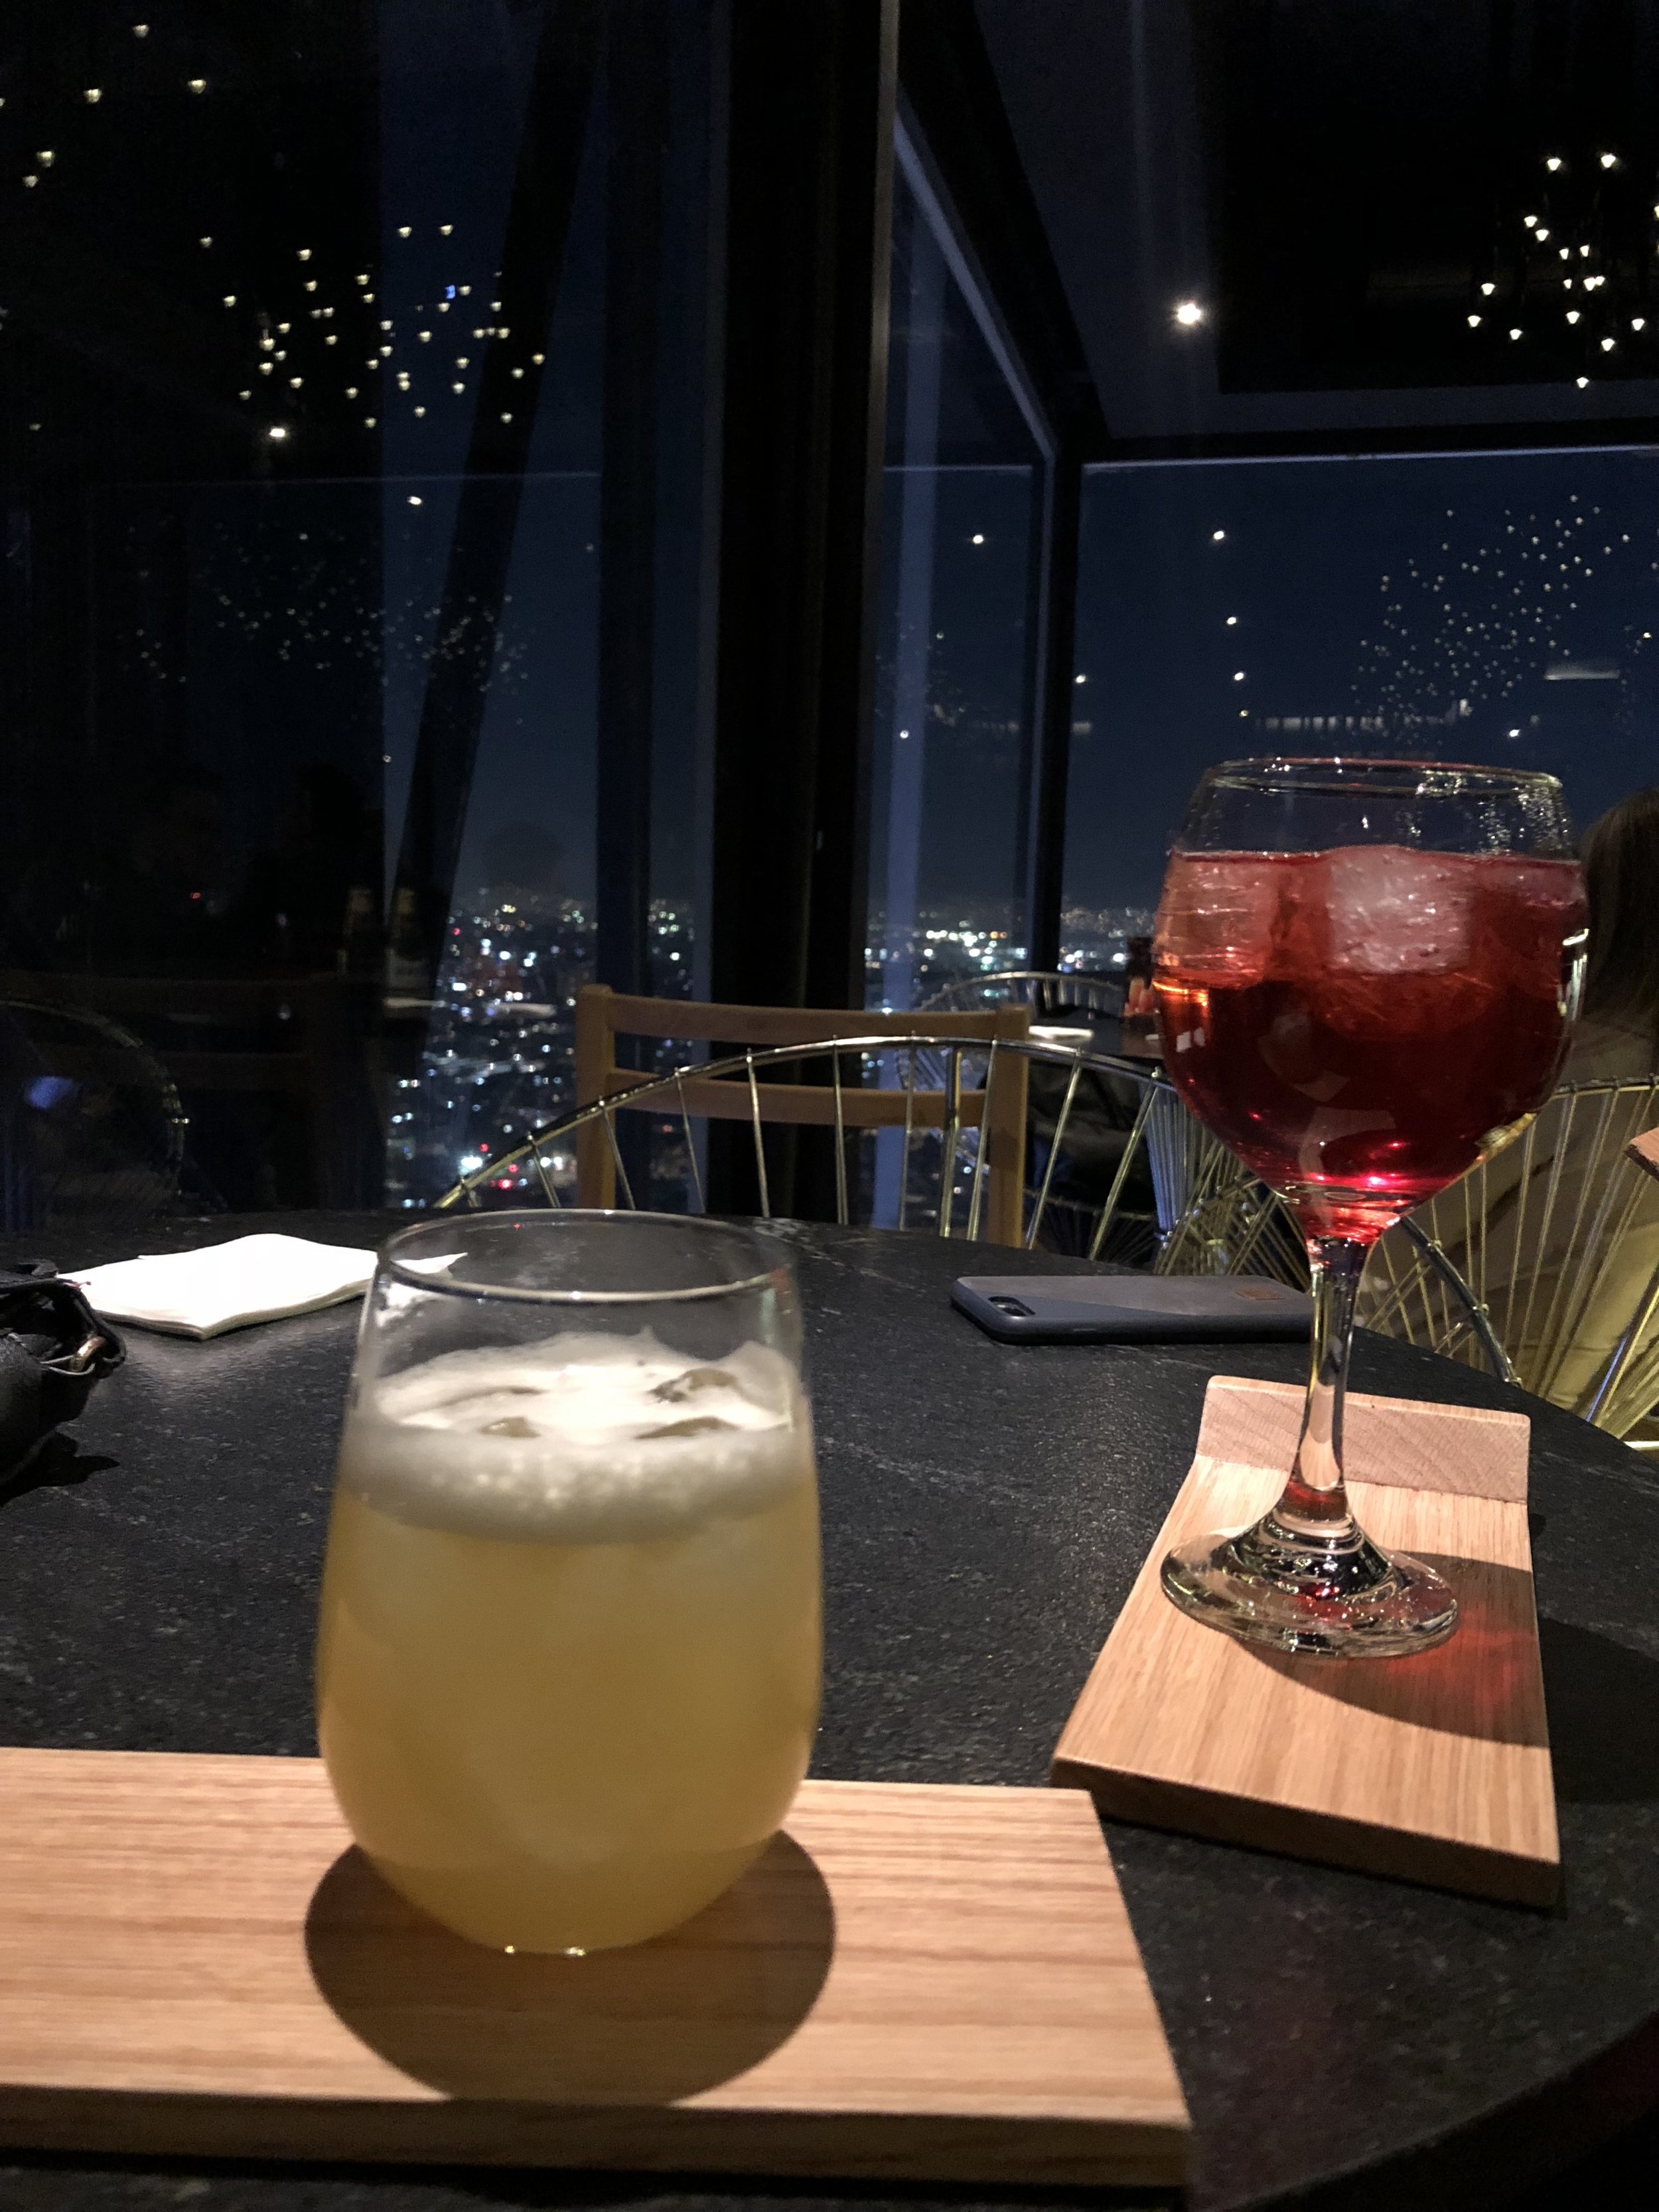 Torre Latinoamericana | Mexico City | The 10 Best Spots to Eat and Drink in Mexico City | www.flowersandleatherevents.com